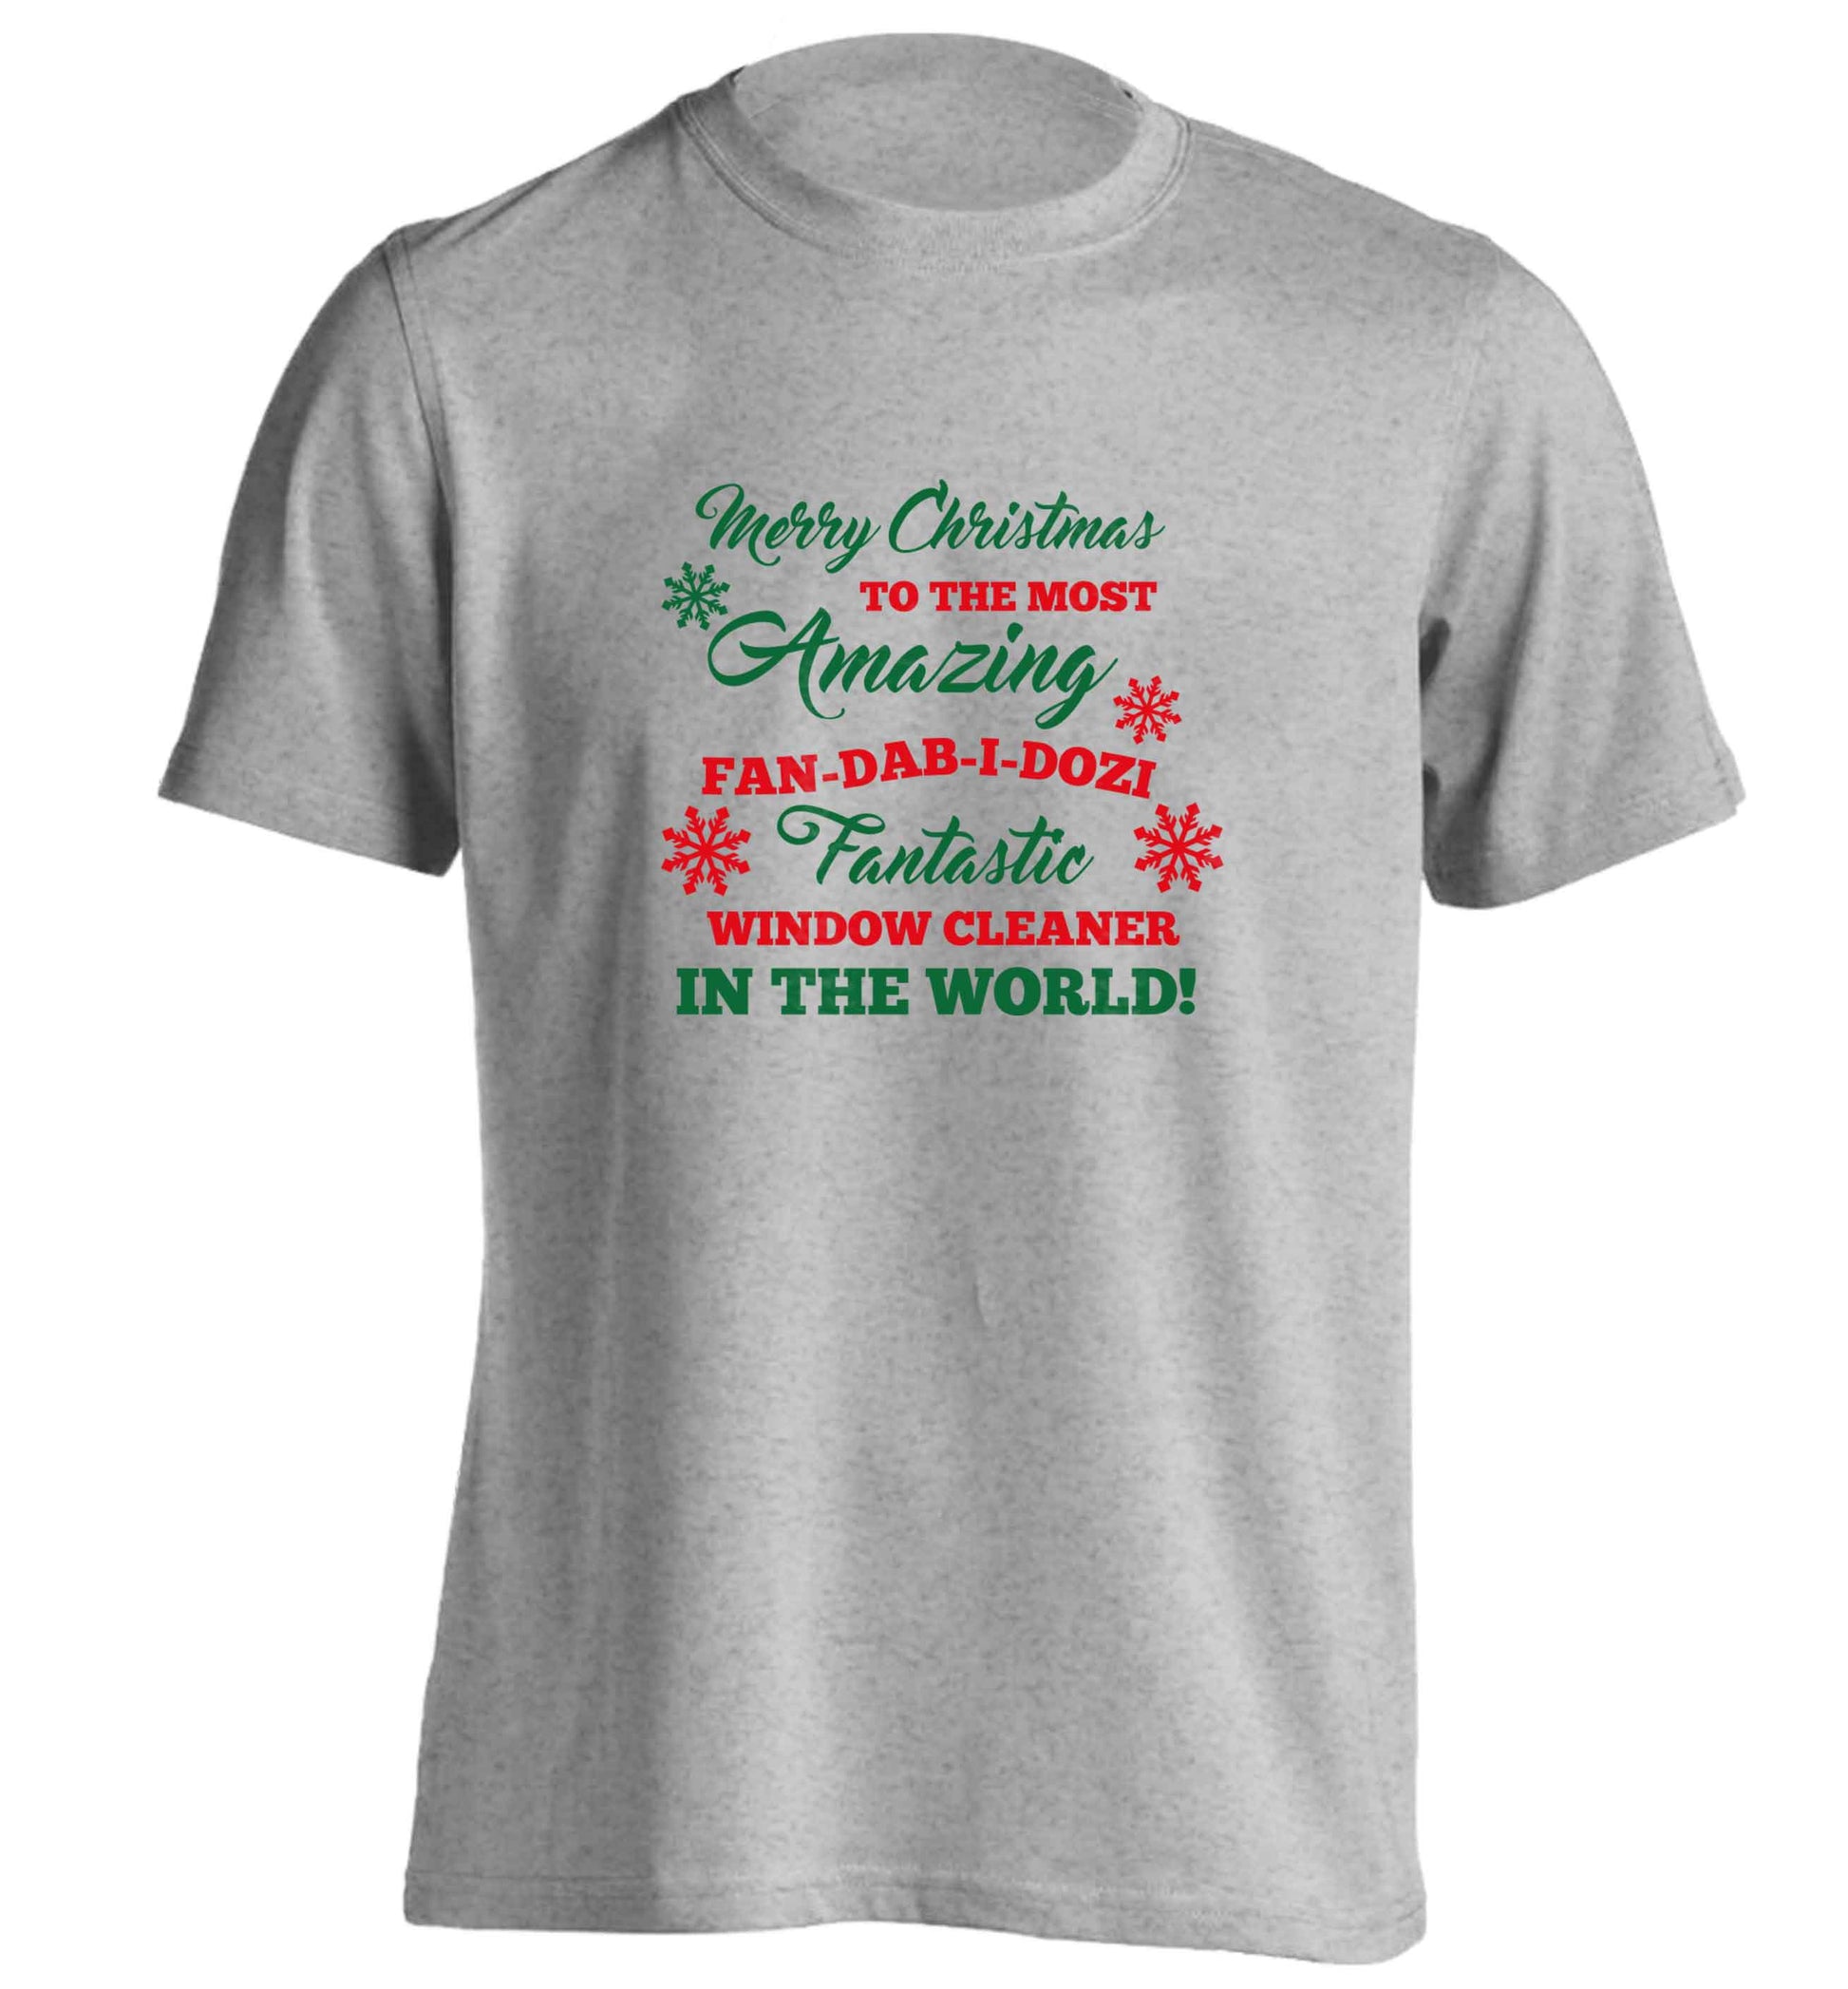 Merry Christmas to the most amazing window cleaner in the world! adults unisex grey Tshirt 2XL